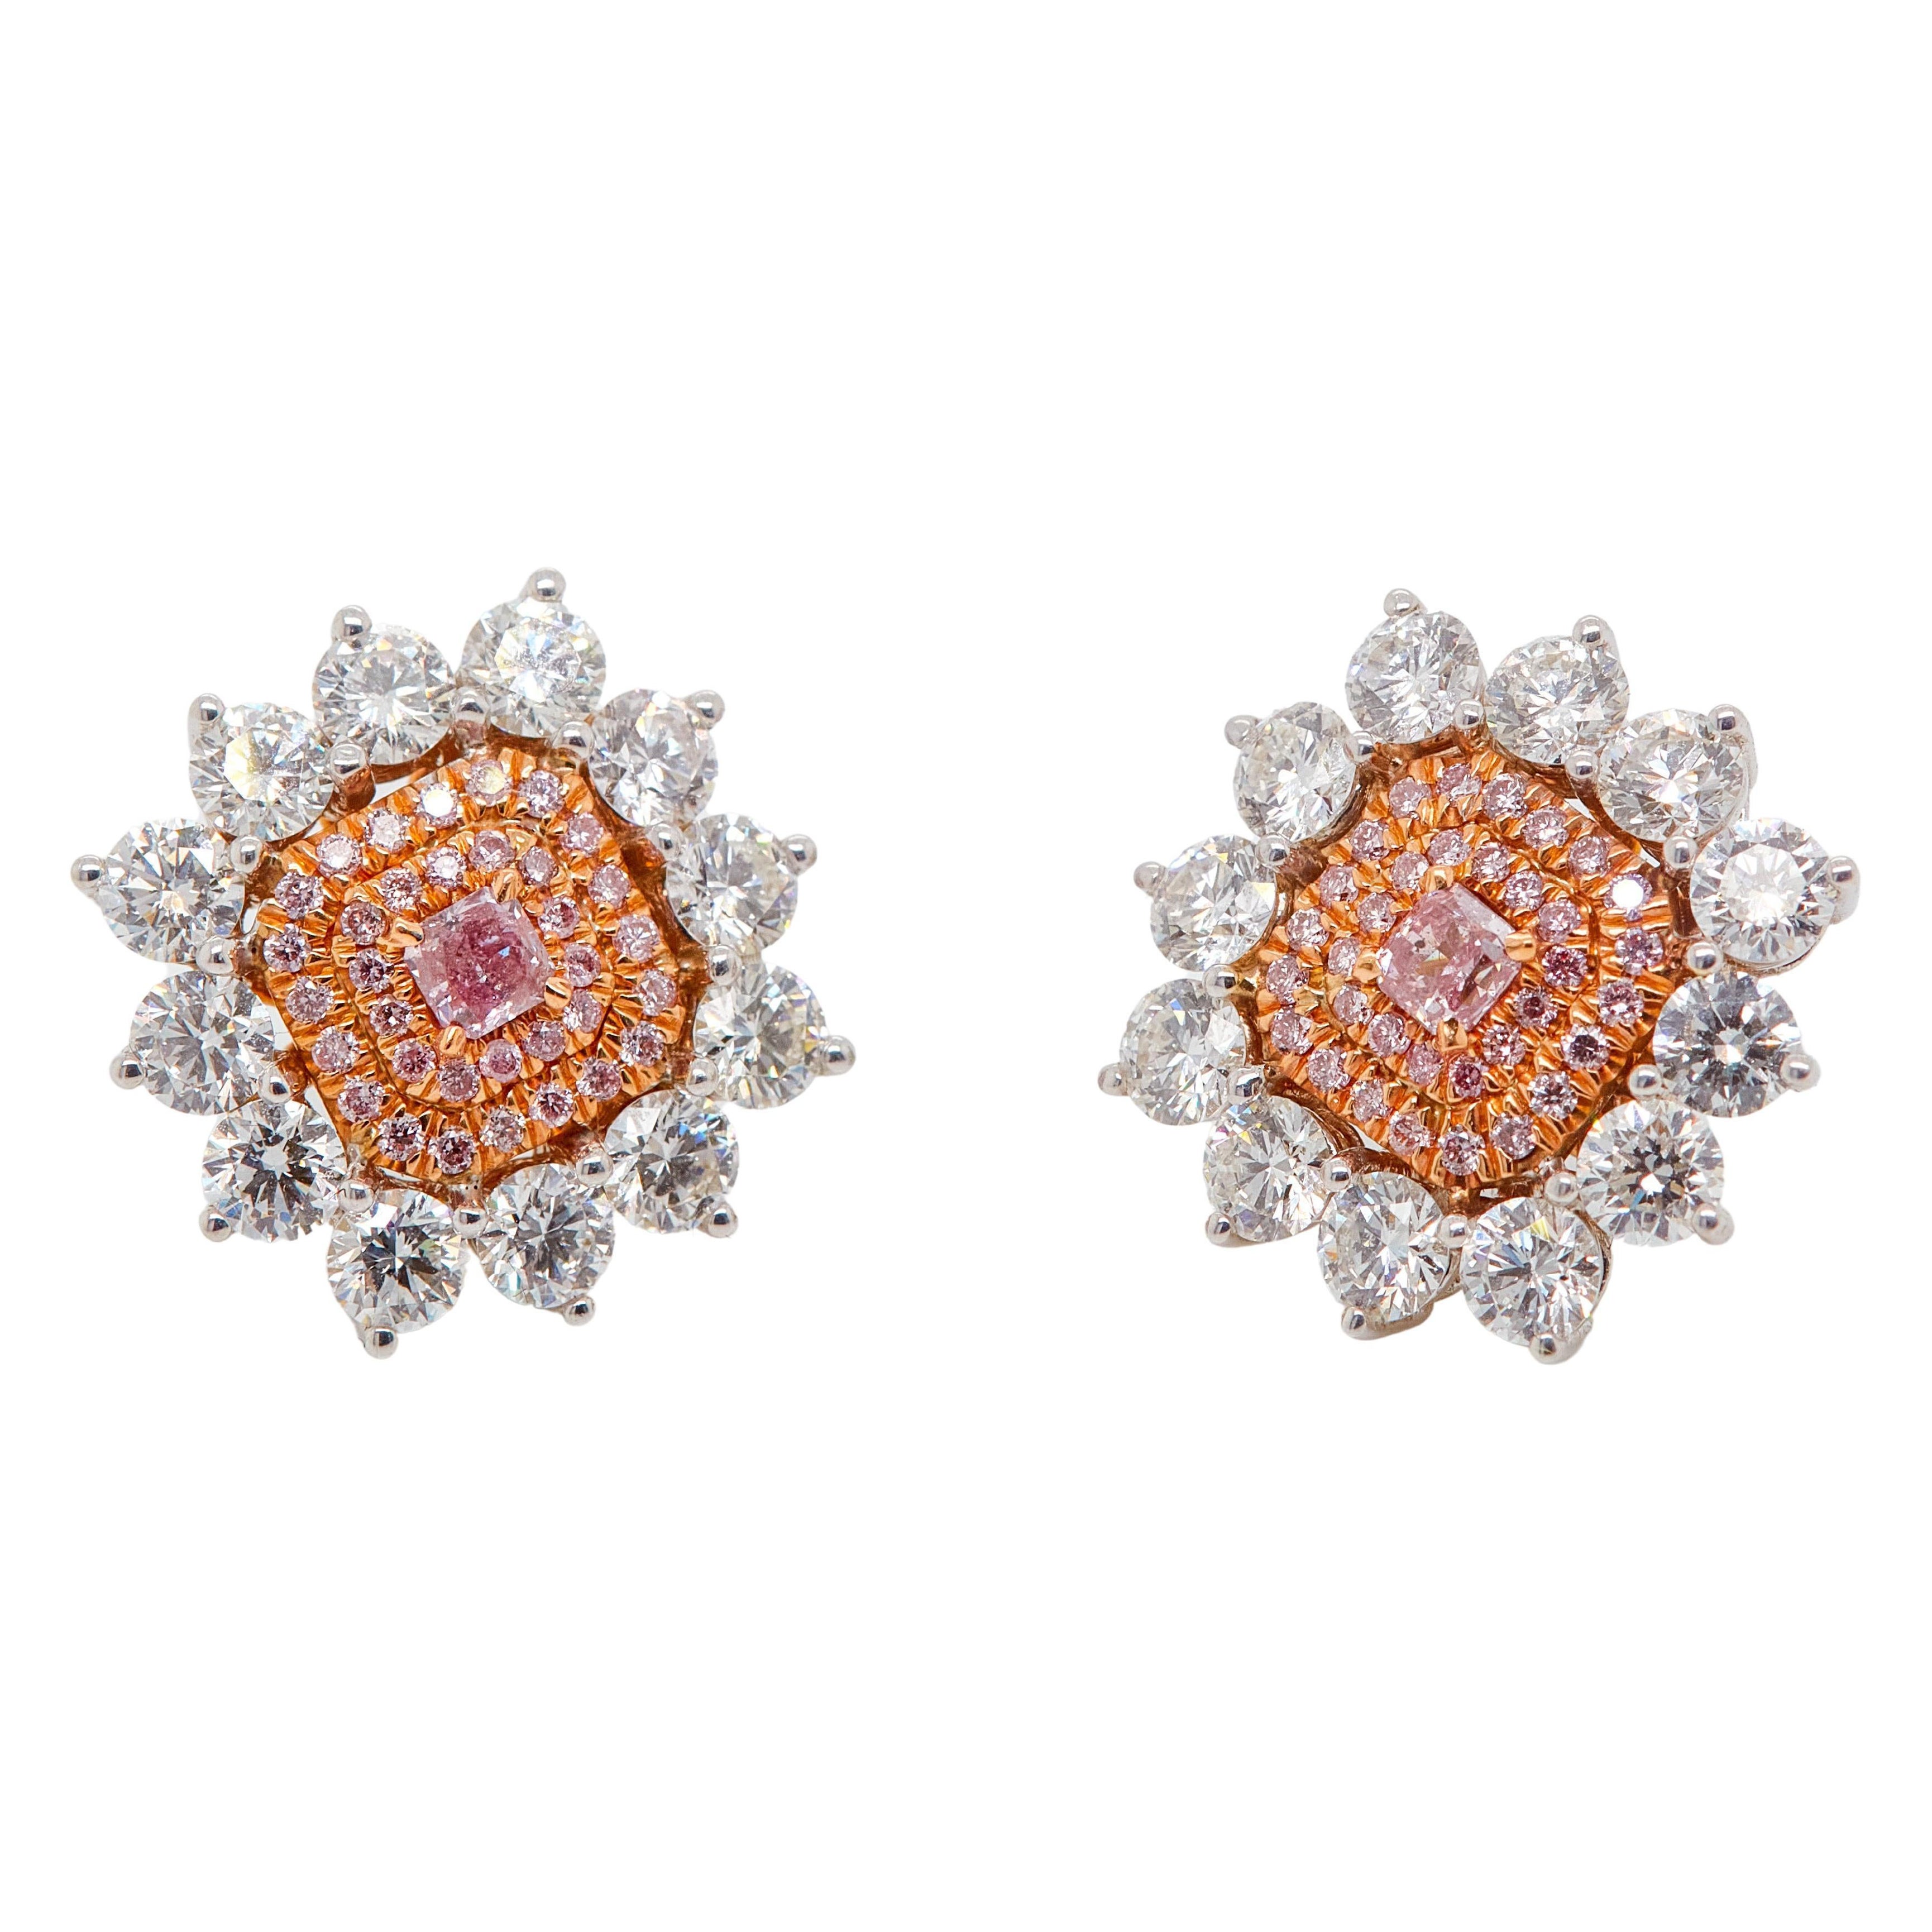 4.33 Carat Fancy Intense Pink and White Diamond Stud Earrings, GIA Certified For Sale